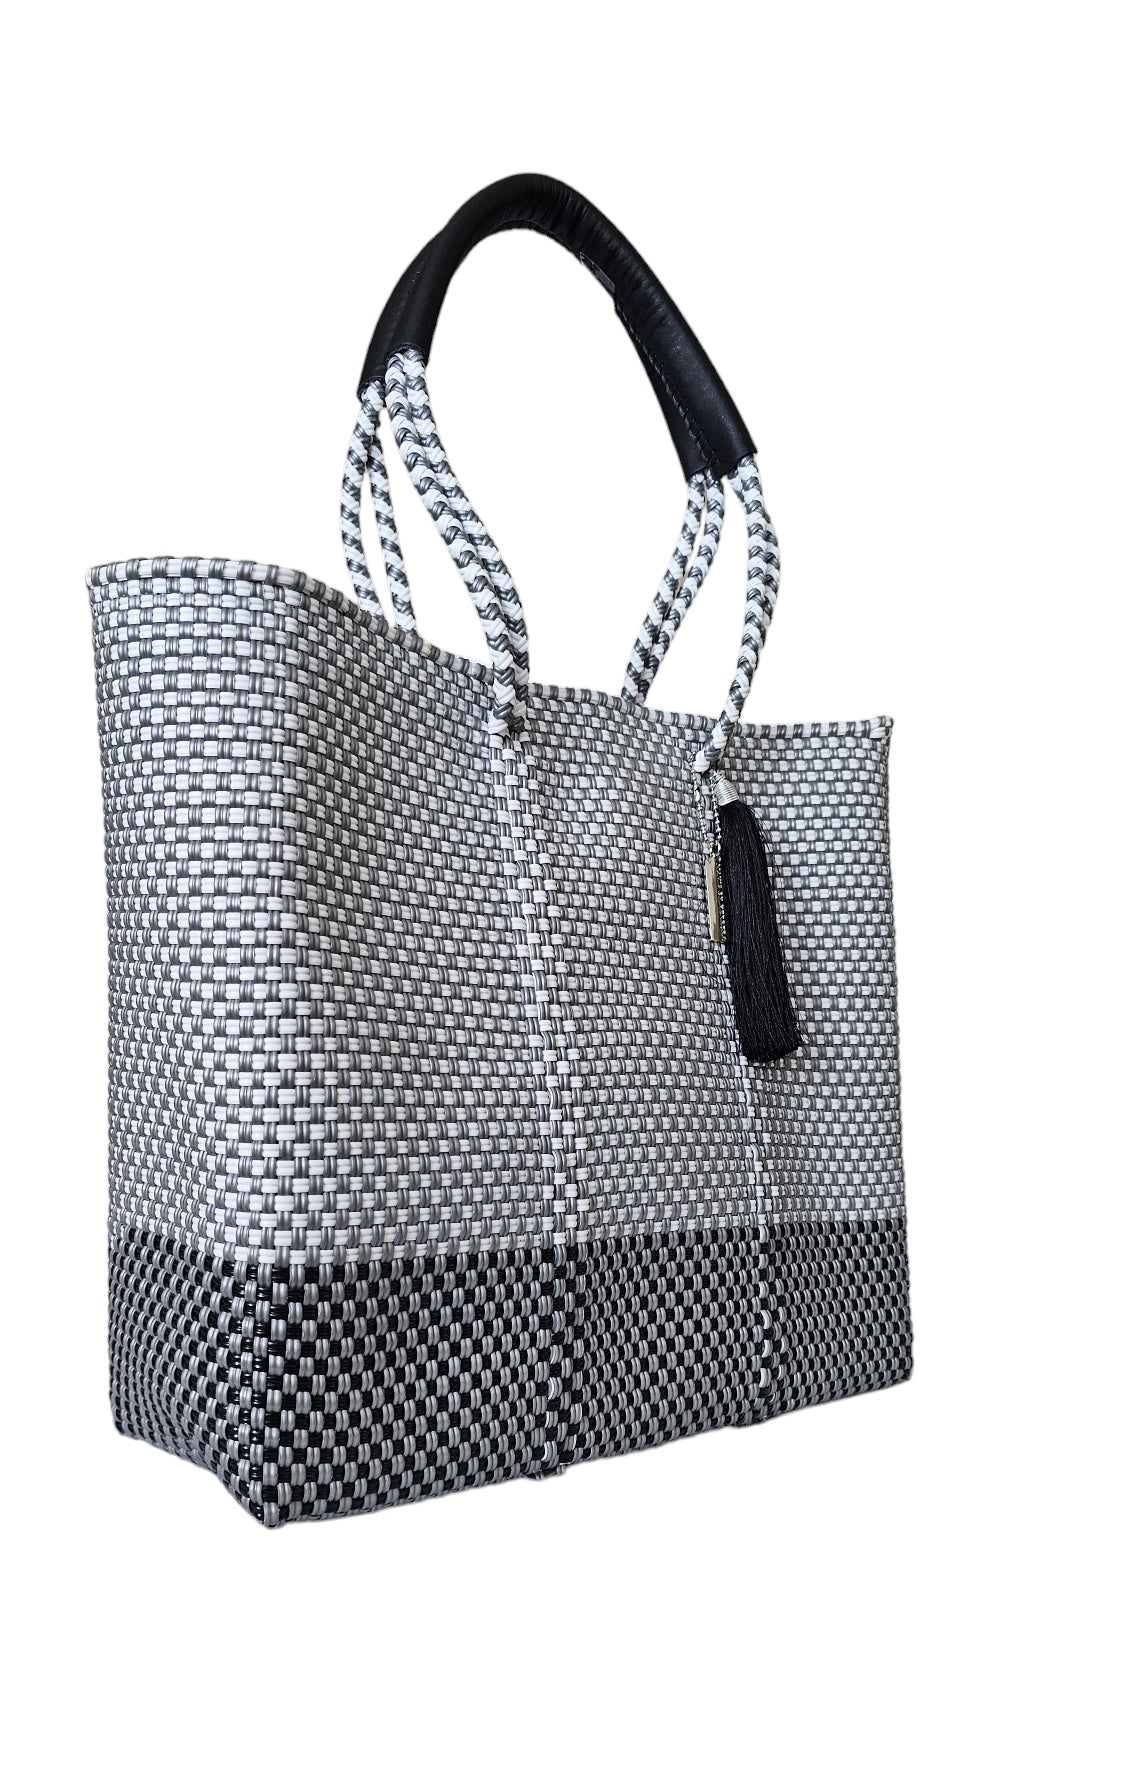 resort tote bag lined with leather handles